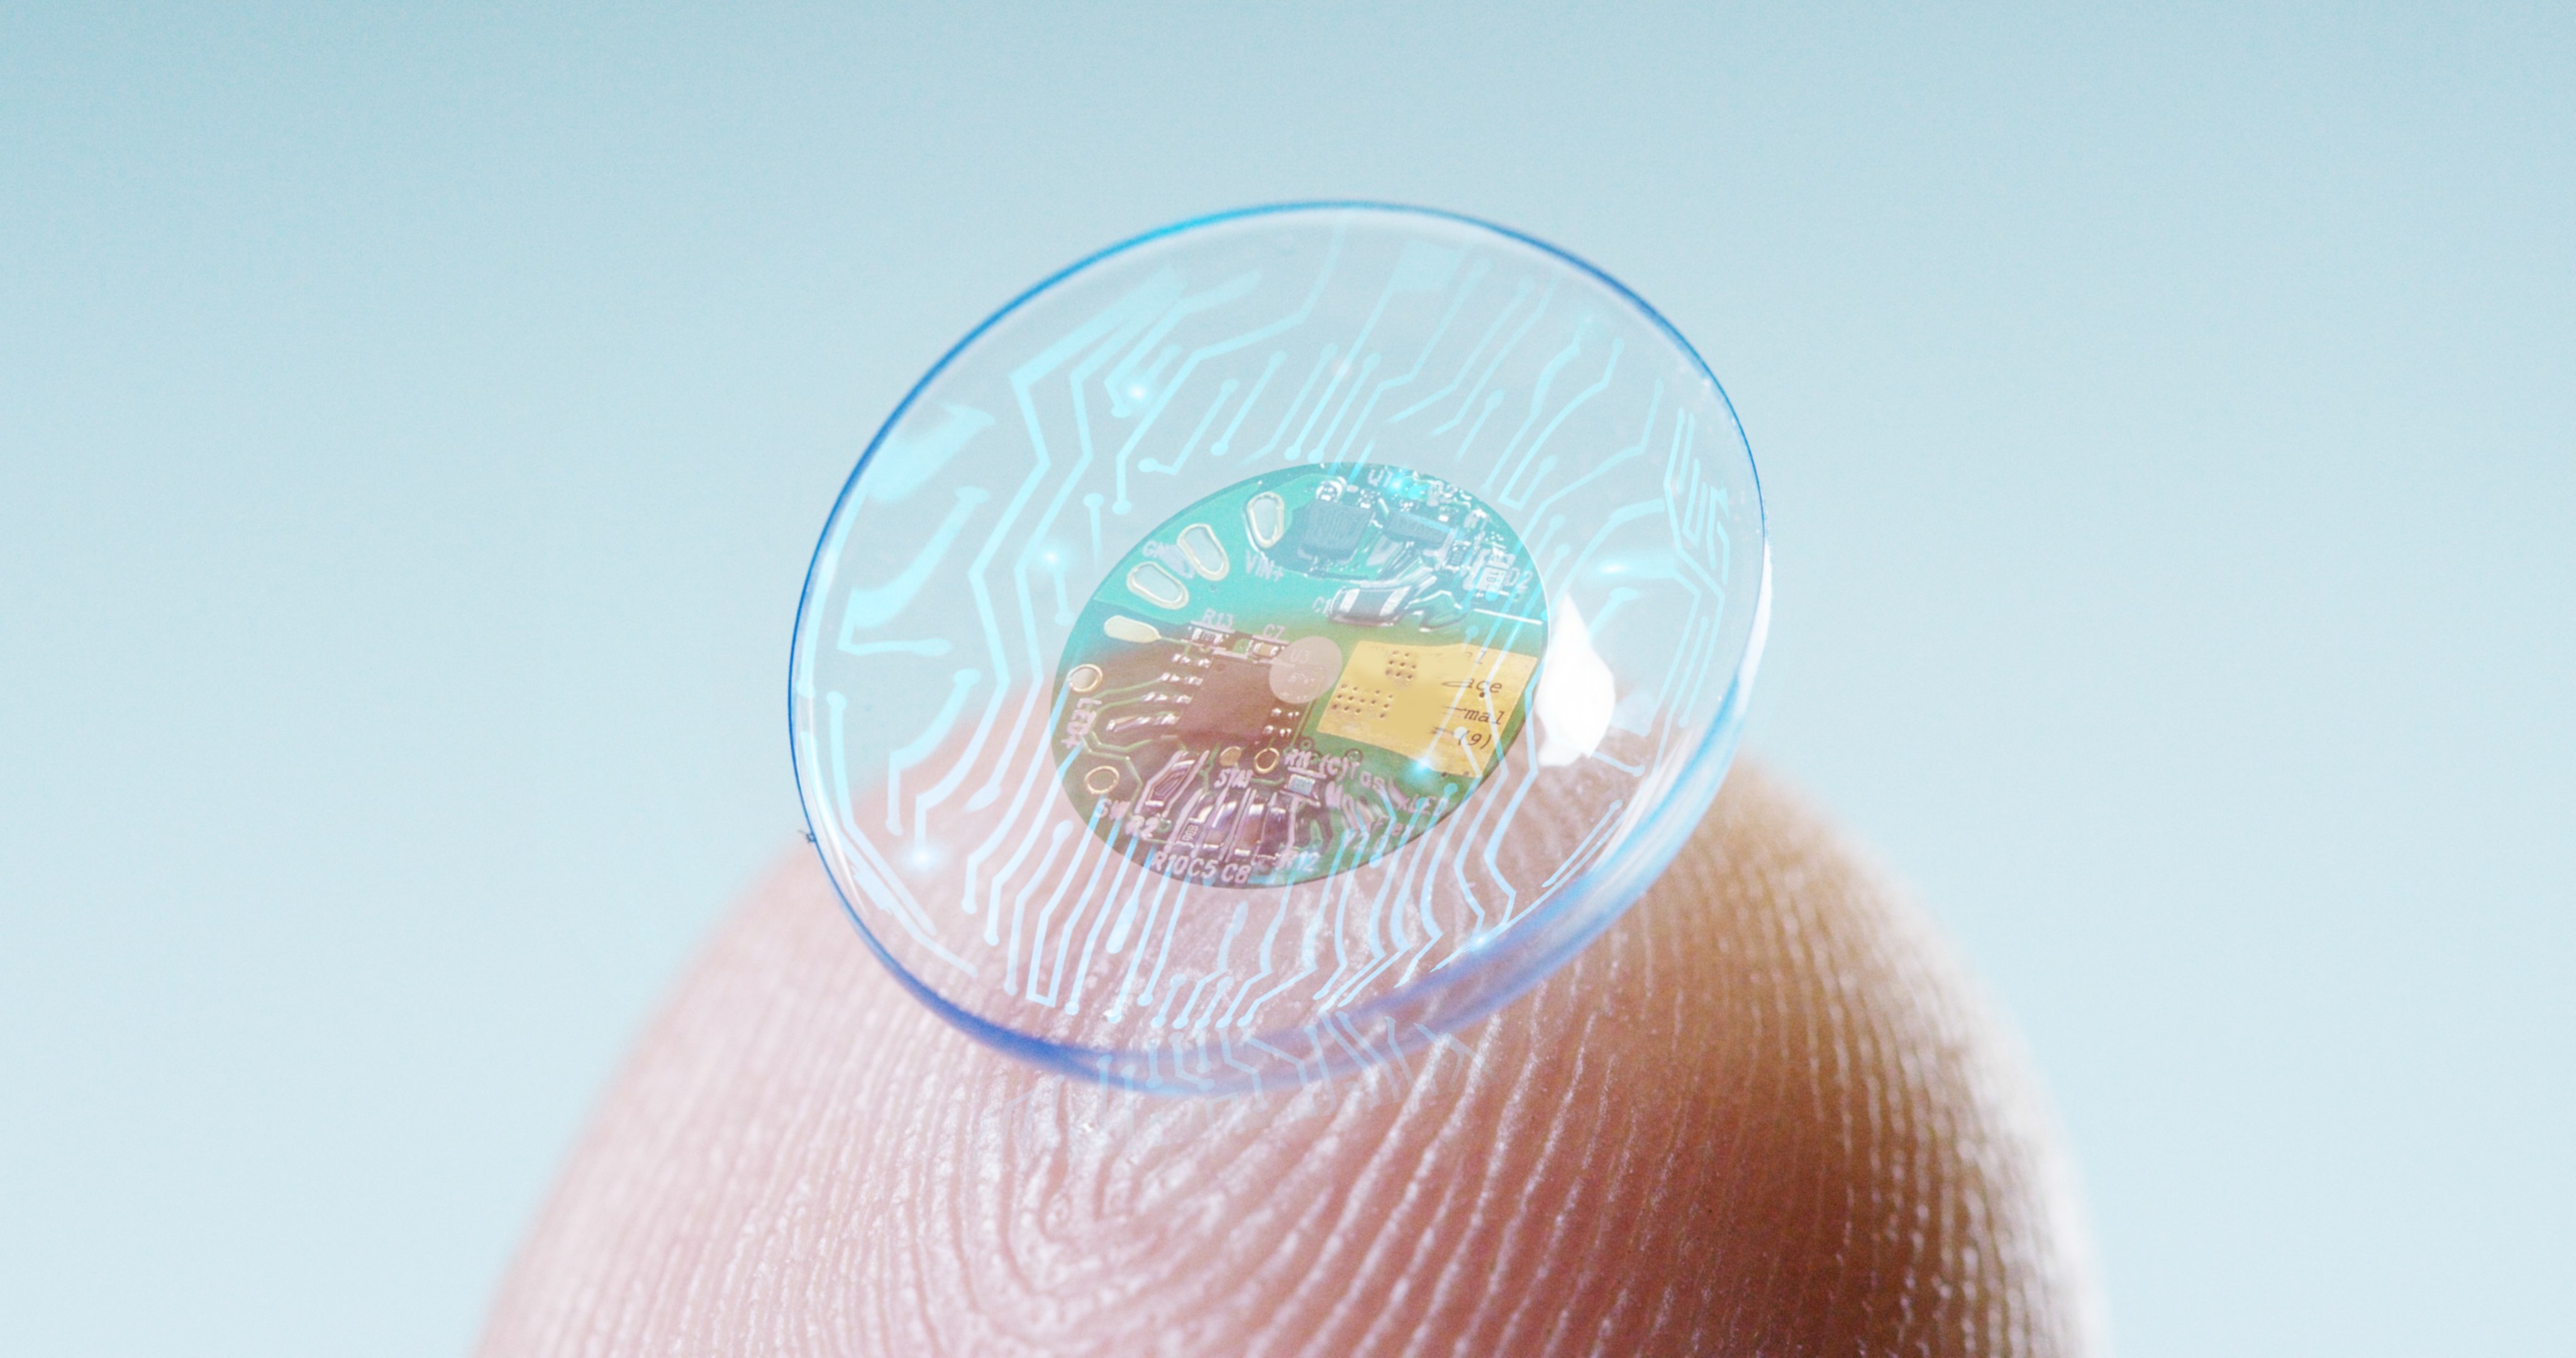 Contact lens with sensor in middle held on fingertip.